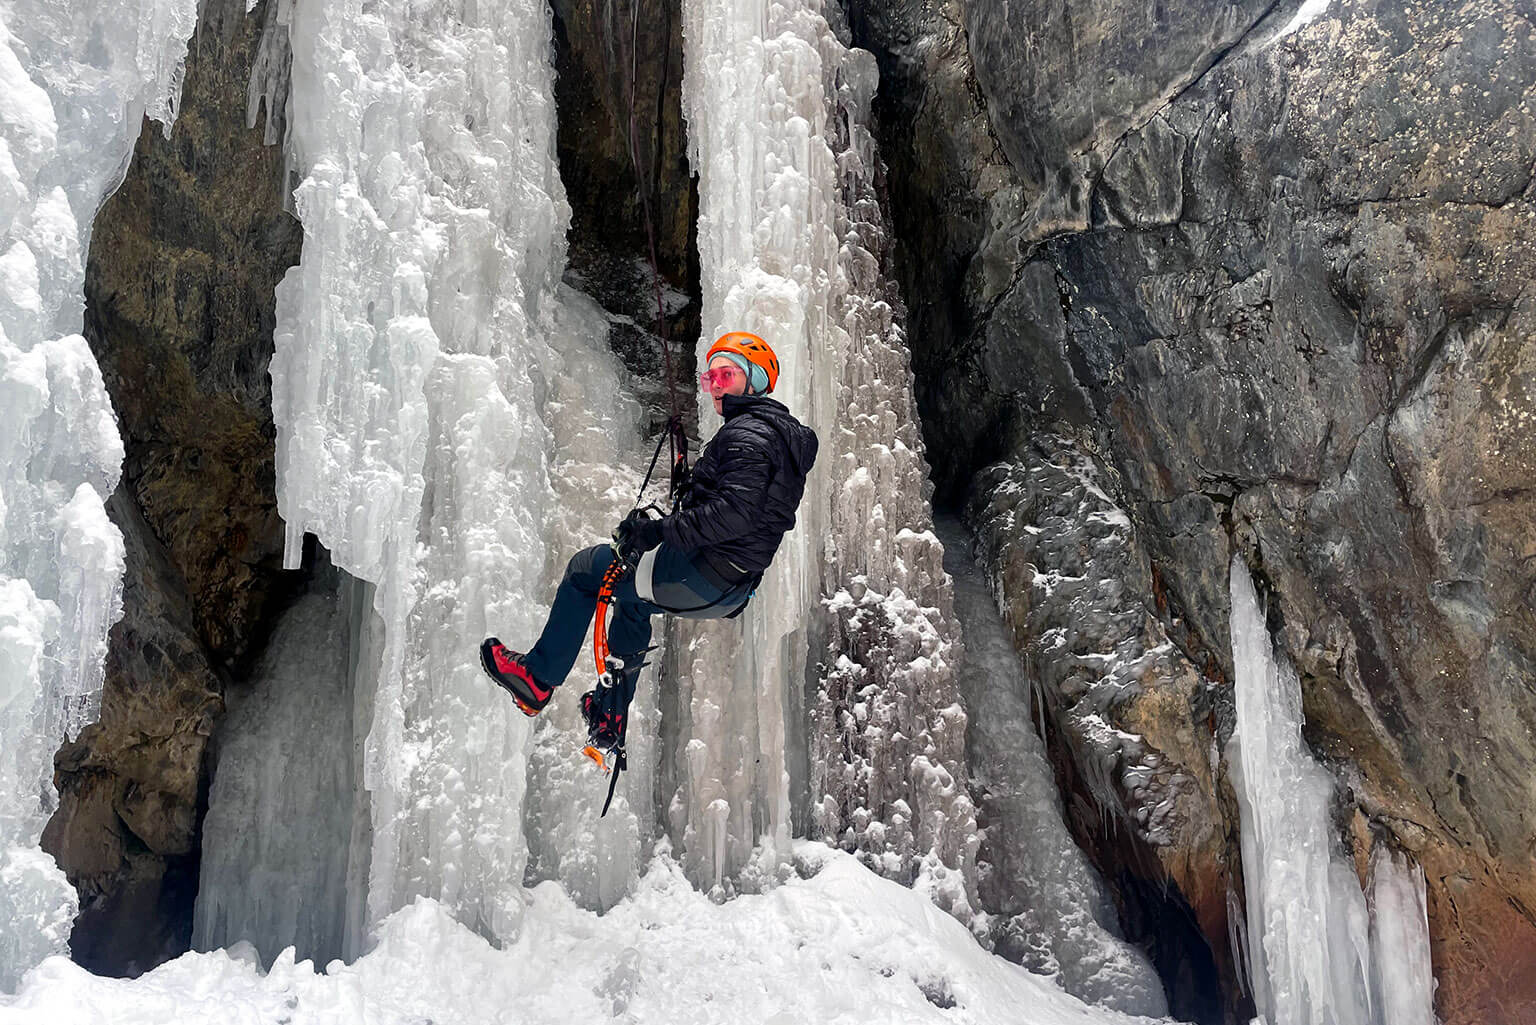 U.S. Air Force Cadet 3rd Class Victor Hough climbs Ice Falls during a visit to Ouray, Colorado.